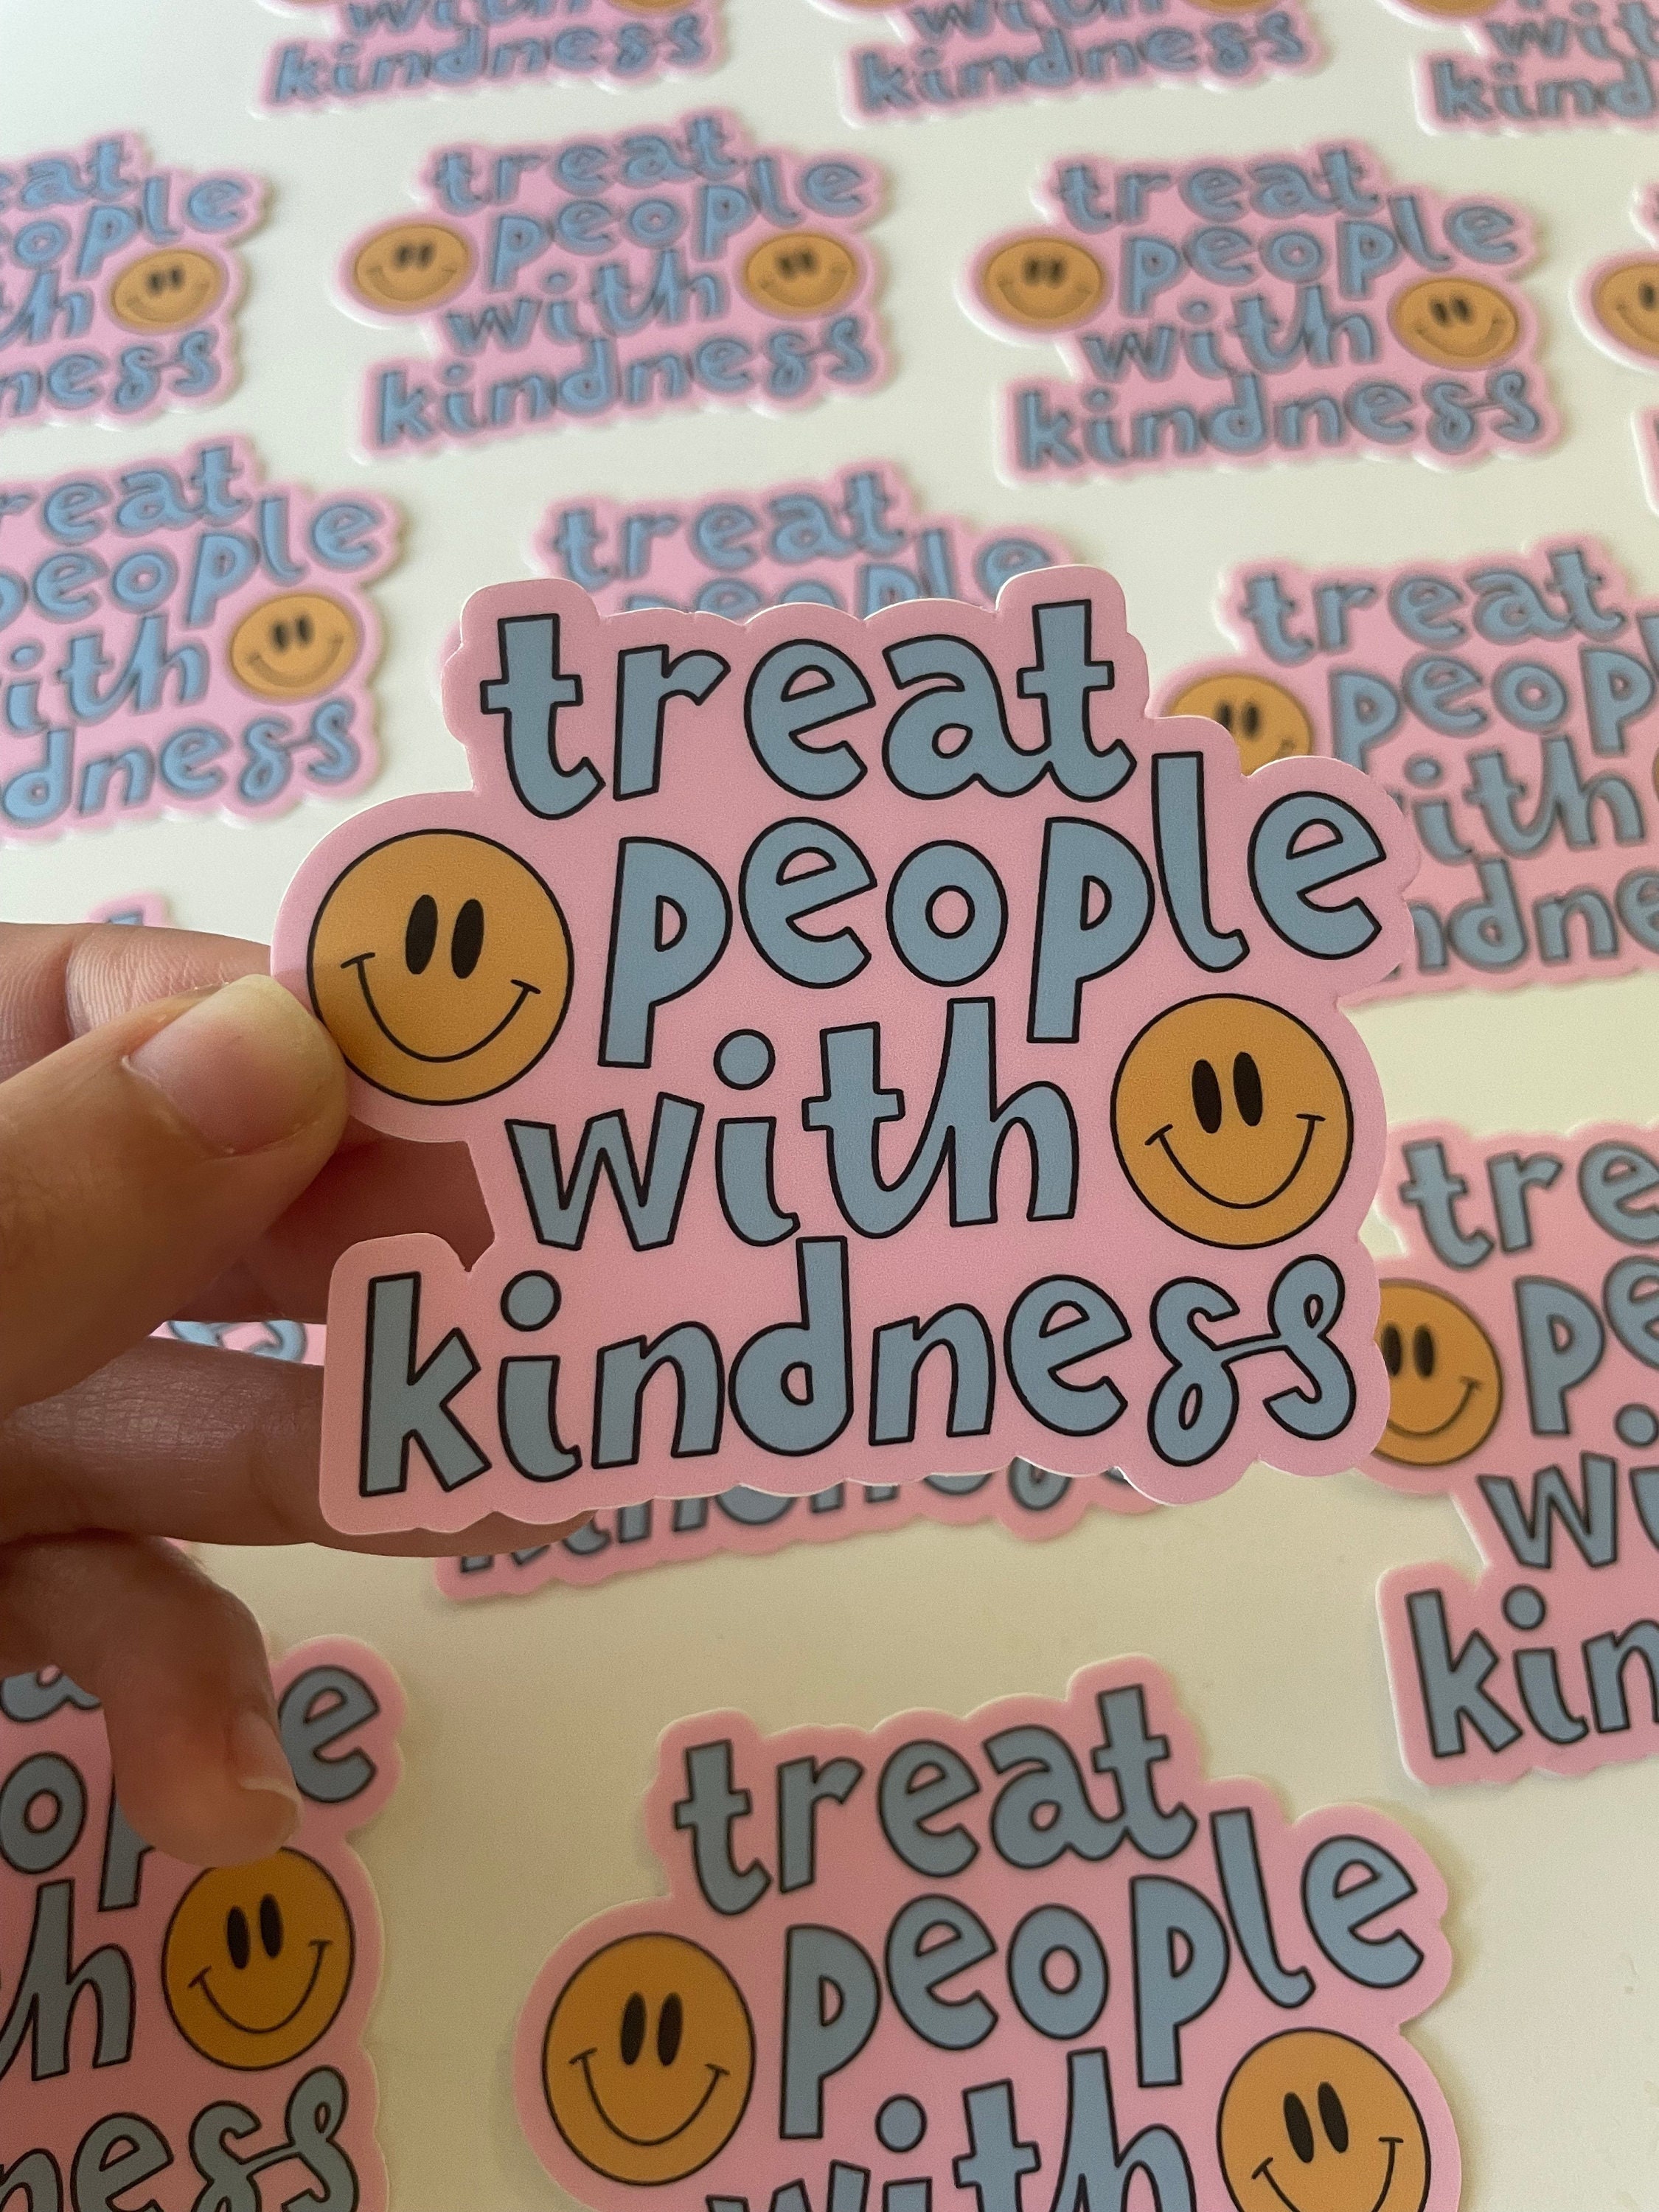 Harry Styles Kindness Sticker from Citizen Ruth – Urban General Store